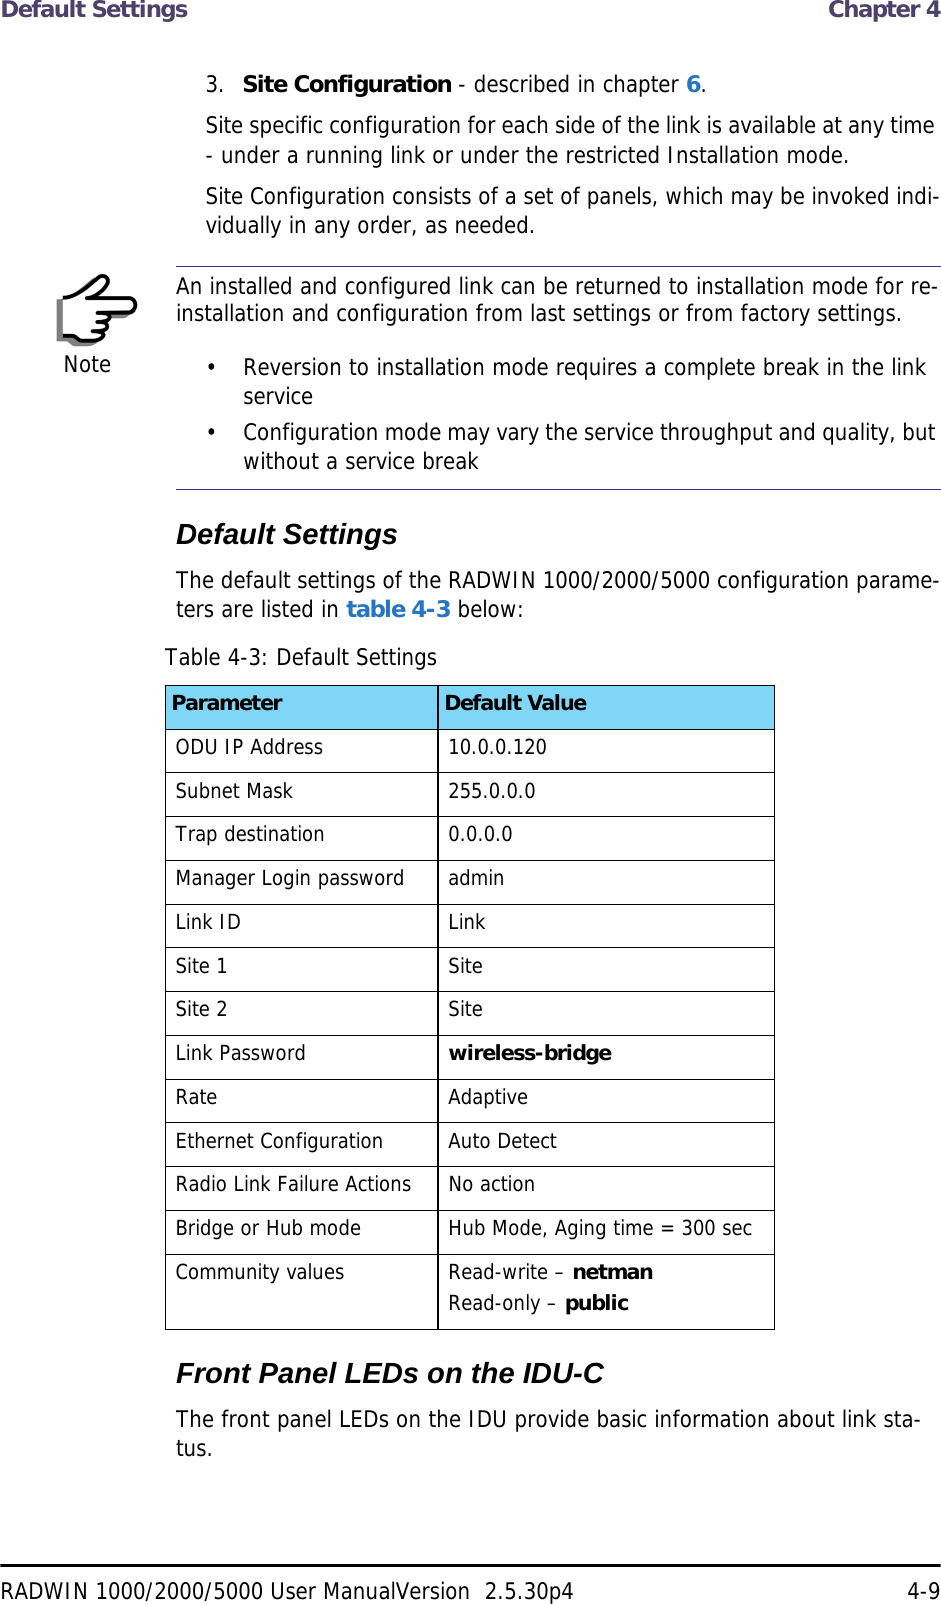 Default Settings  Chapter 4RADWIN 1000/2000/5000 User ManualVersion  2.5.30p4 4-93.  Site Configuration - described in chapter 6.Site specific configuration for each side of the link is available at any time - under a running link or under the restricted Installation mode.Site Configuration consists of a set of panels, which may be invoked indi-vidually in any order, as needed.Default SettingsThe default settings of the RADWIN 1000/2000/5000 configuration parame-ters are listed in table 4-3 below:Front Panel LEDs on the IDU-CThe front panel LEDs on the IDU provide basic information about link sta-tus. NoteAn installed and configured link can be returned to installation mode for re-installation and configuration from last settings or from factory settings.• Reversion to installation mode requires a complete break in the link service• Configuration mode may vary the service throughput and quality, but without a service breakTable 4-3: Default SettingsParameter Default ValueODU IP Address 10.0.0.120Subnet Mask 255.0.0.0Trap destination 0.0.0.0Manager Login password adminLink ID Link Site 1 SiteSite 2 SiteLink Password wireless-bridgeRate AdaptiveEthernet Configuration Auto DetectRadio Link Failure Actions No actionBridge or Hub mode Hub Mode, Aging time = 300 secCommunity values Read-write – netmanRead-only – public